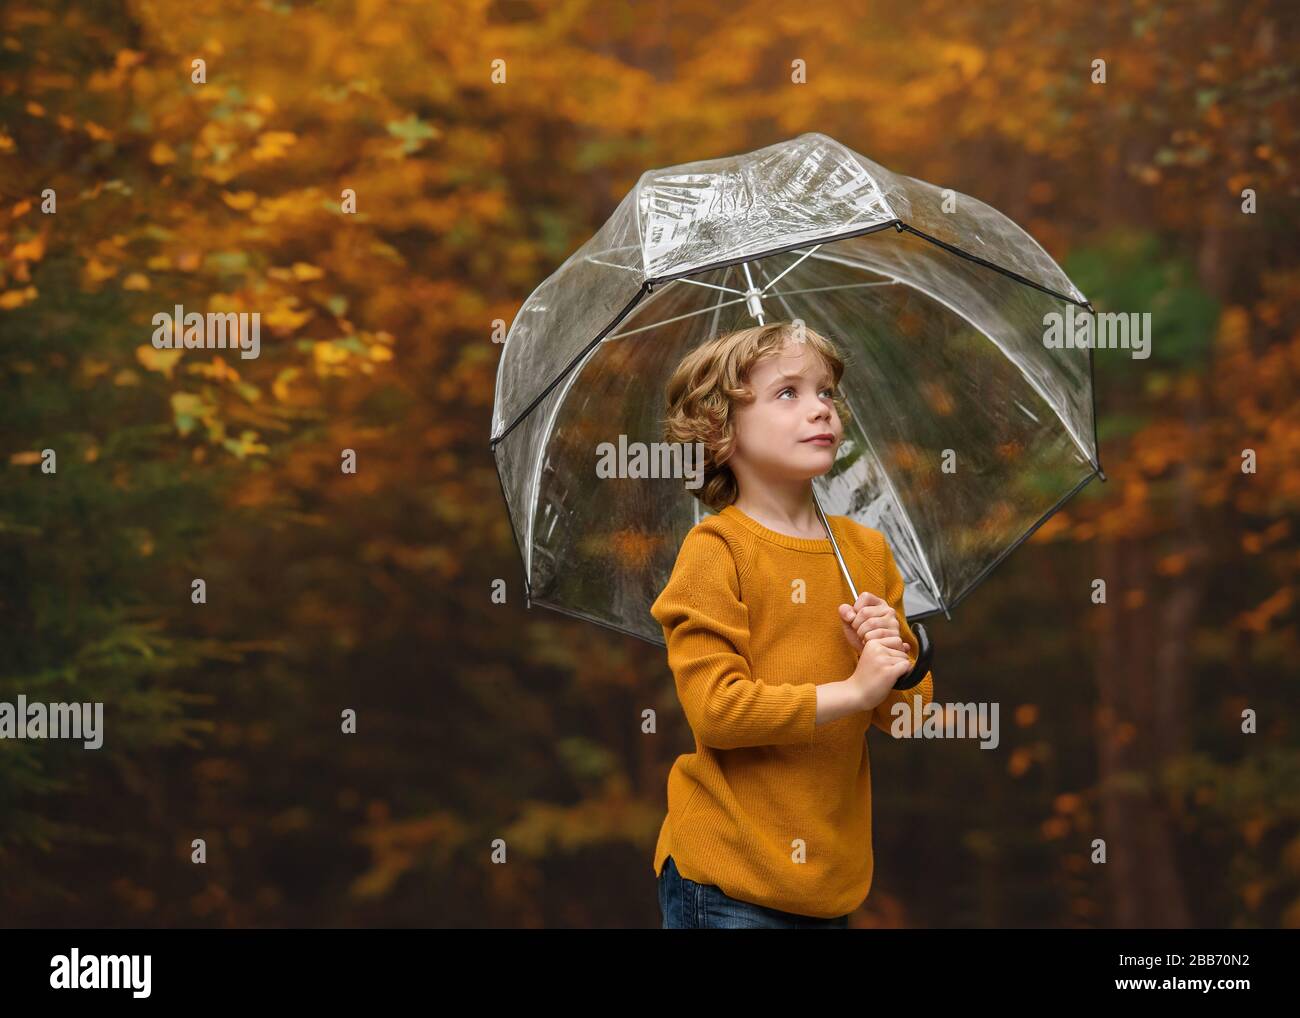 Portrait of a boy standing in the forest holding an umbrella, Bedford, Halifax, Nova Scotia, Canada Stock Photo